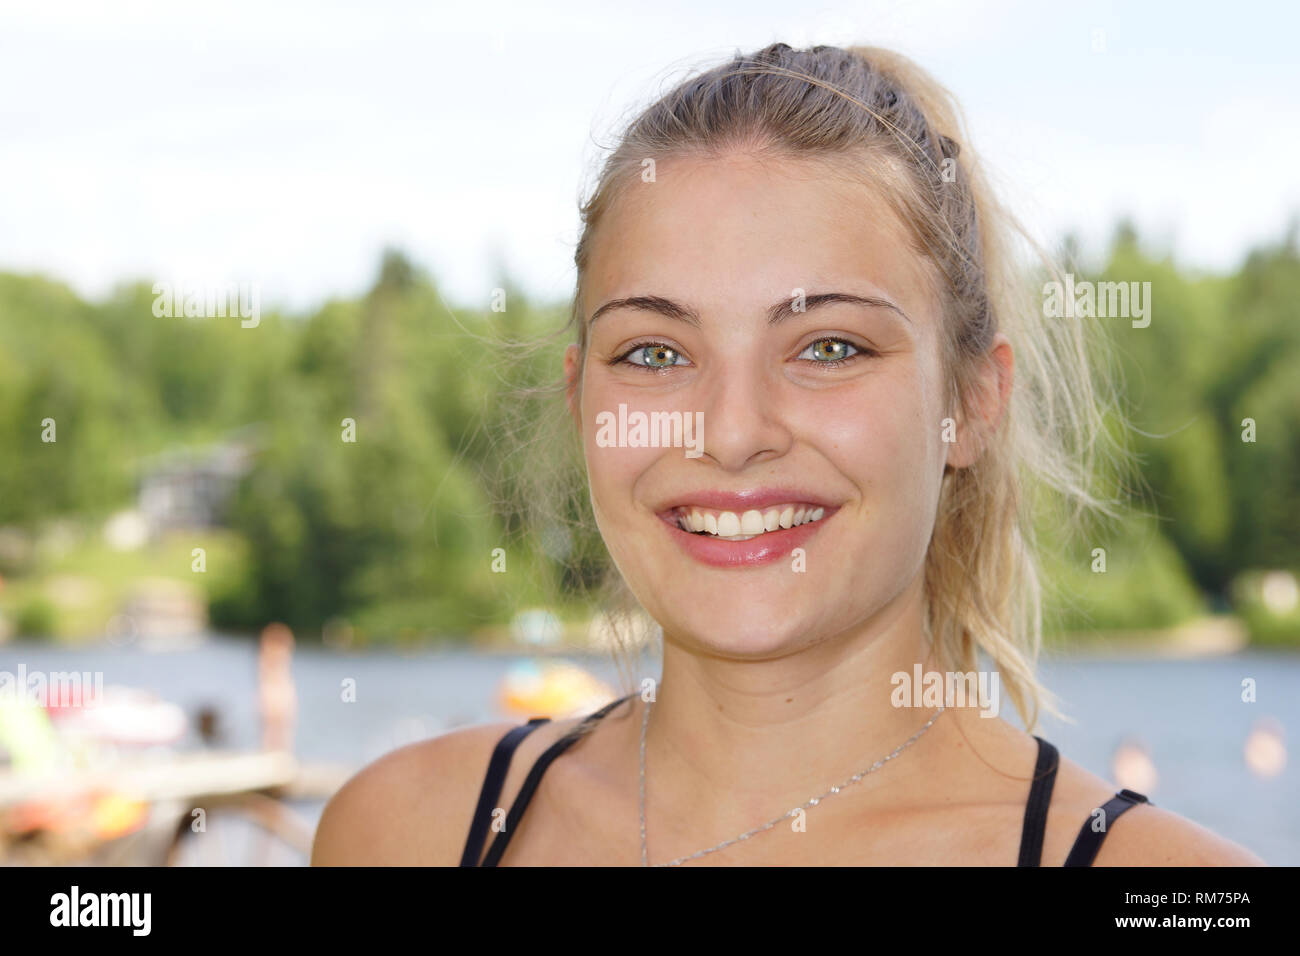 Portrait of beautiful young blond woman with stunning eyes outdoor Stock Photo